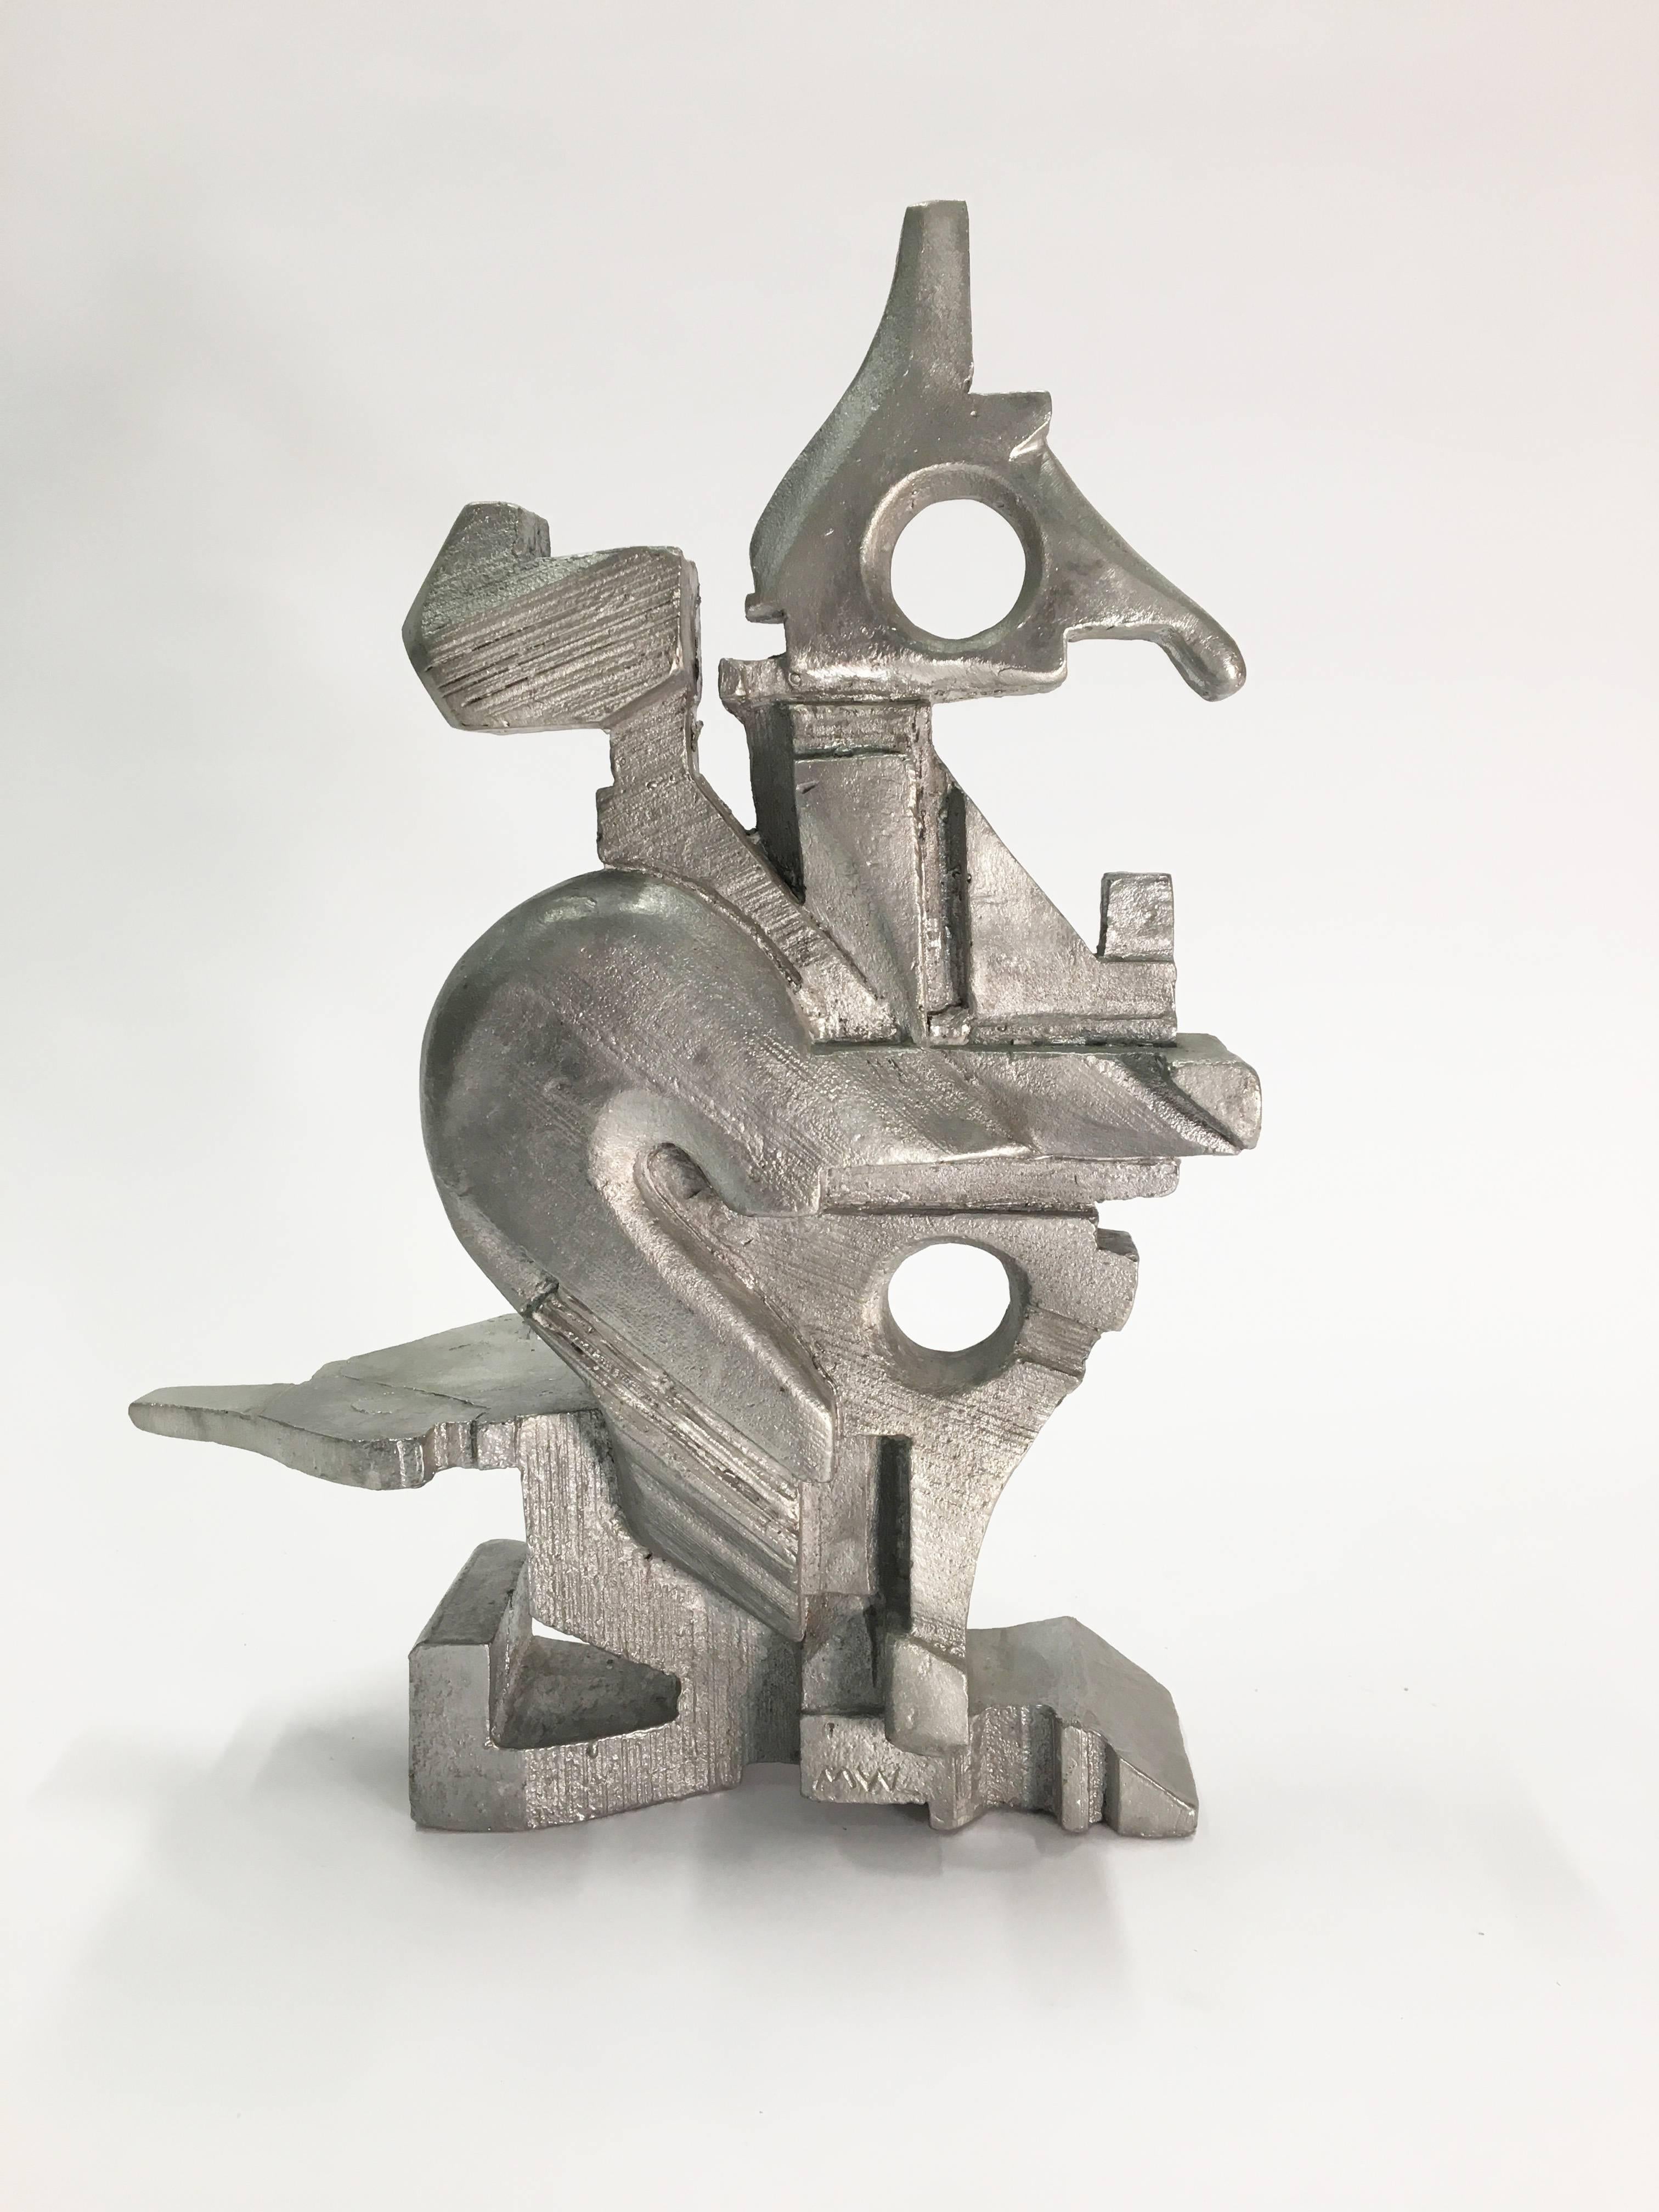 Beautiful tabletop sculpture cast out of aluminum by artist Michael Walsh.

Michael Walsh has been exhibiting extensively throughout North America and Europe since 1994. His work has been featured at the Carnegie Museum of Art, National